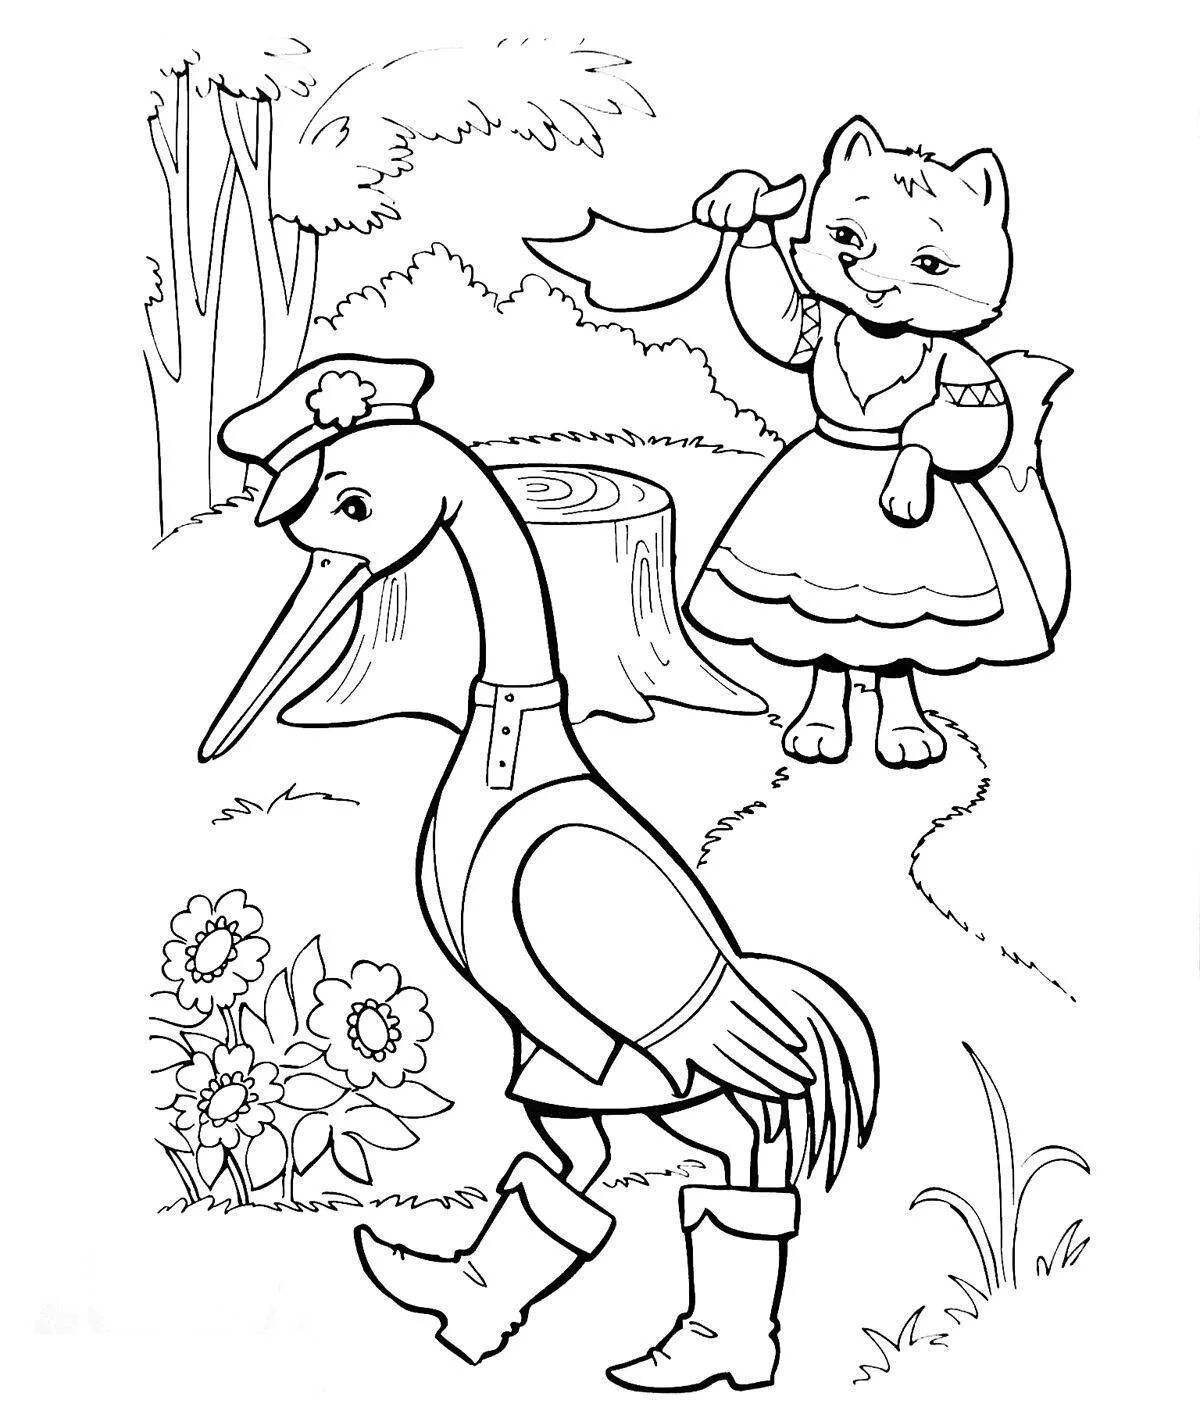 Intriguing coloring book crane and fox fairy tale